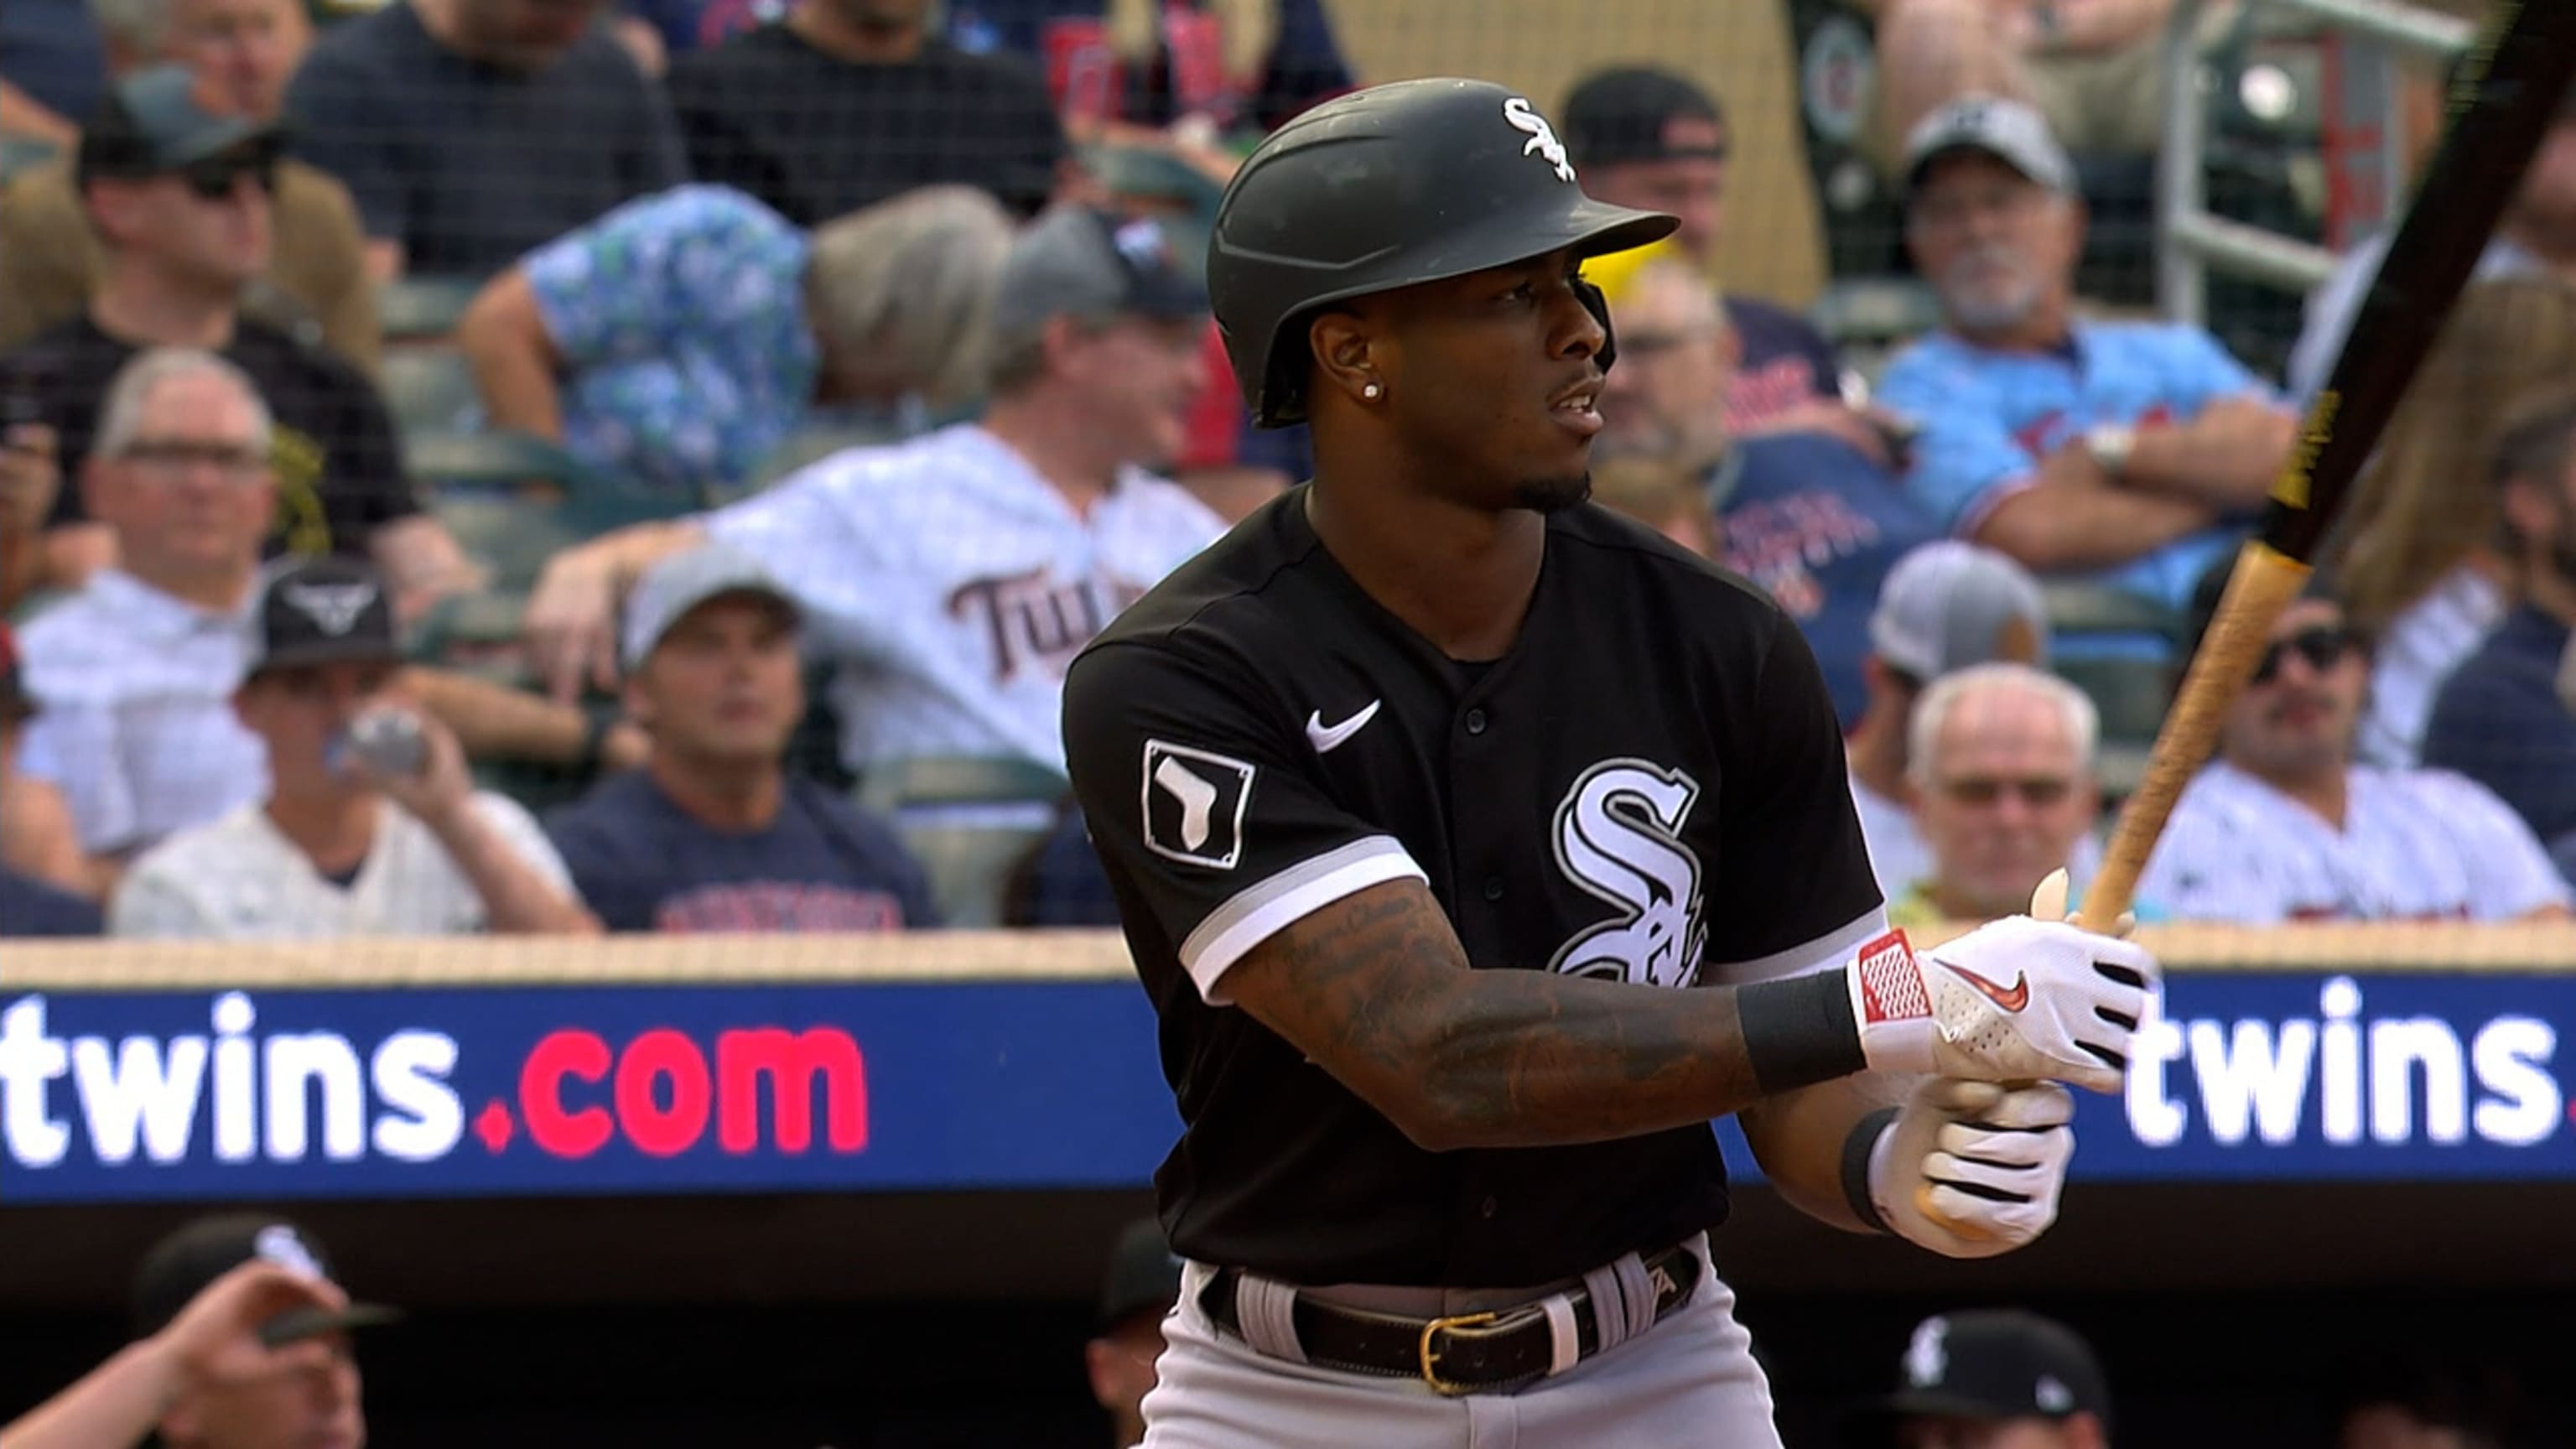 White Sox shortstop Tim Anderson not worried about trade